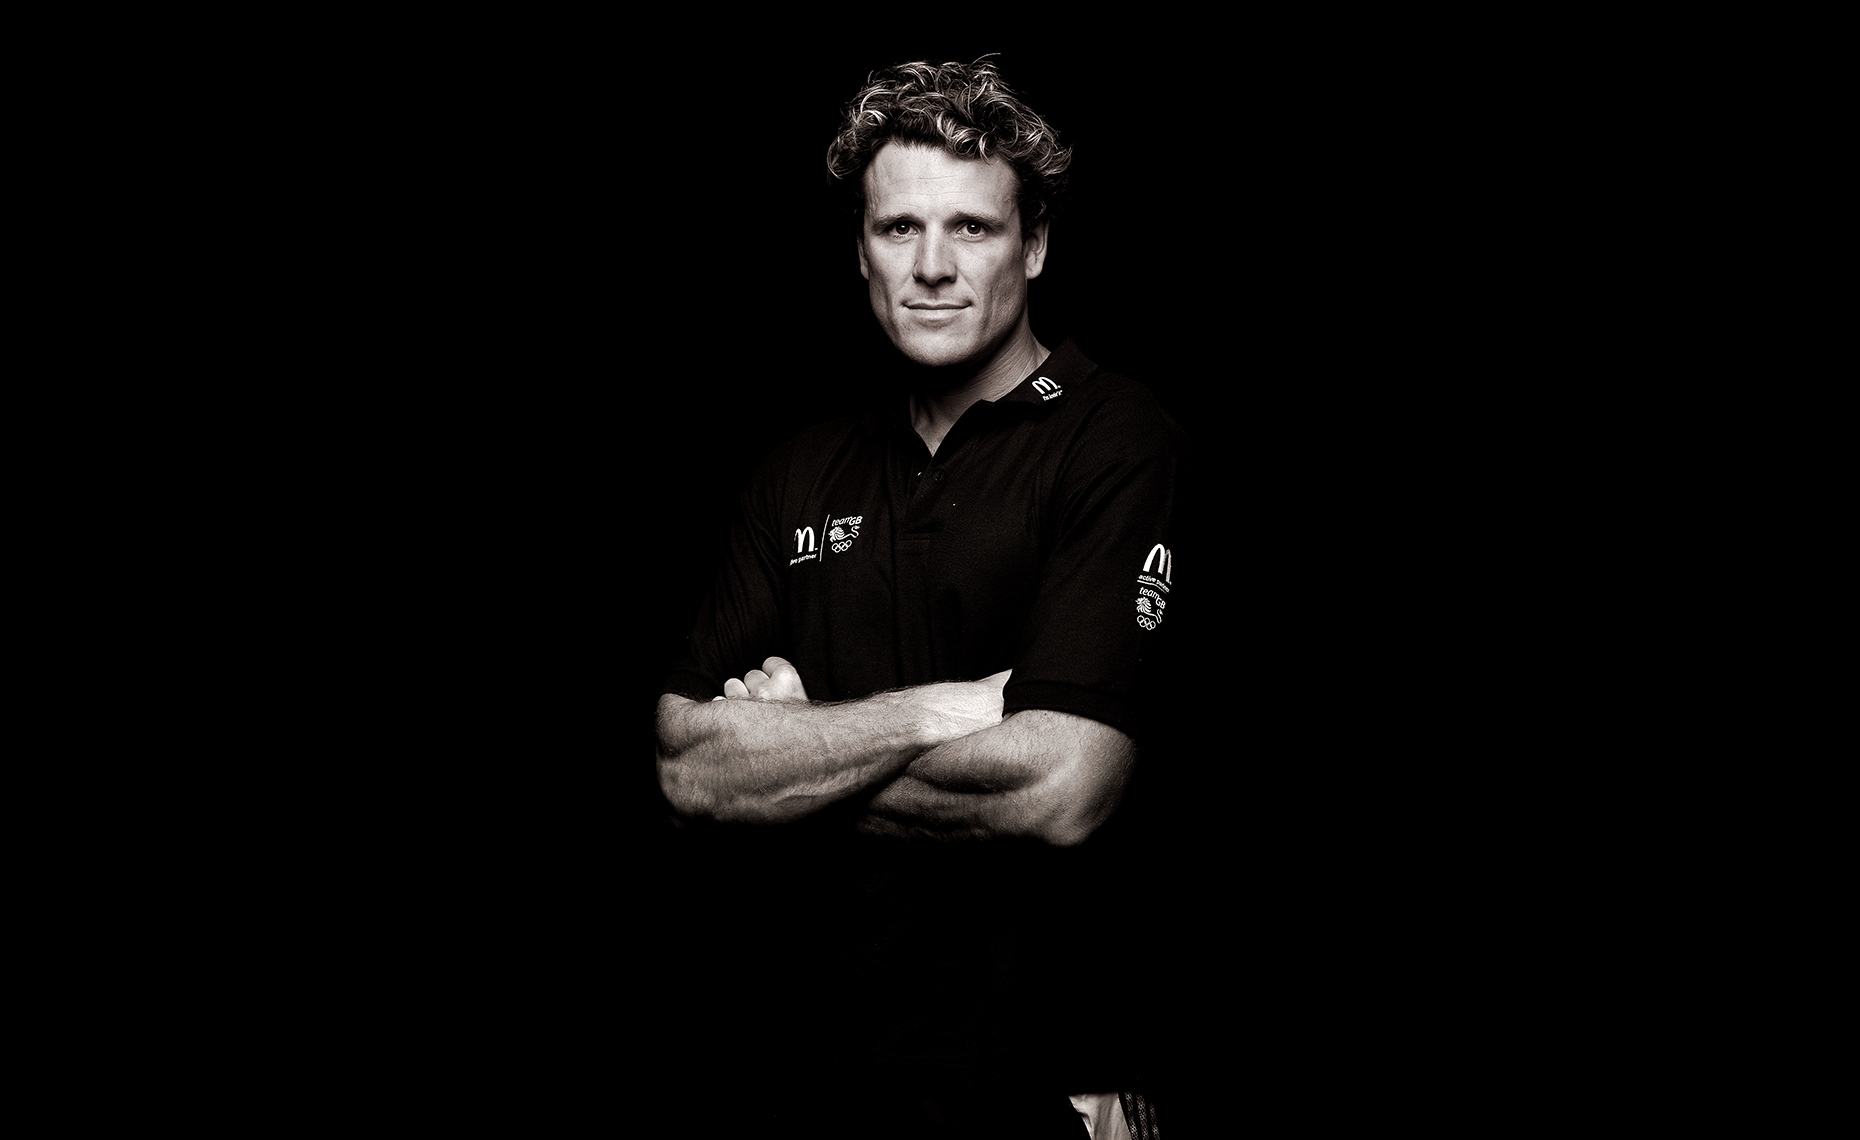 Studio editorial portrait of double Olympic gold medallist James Cracknell OBE.